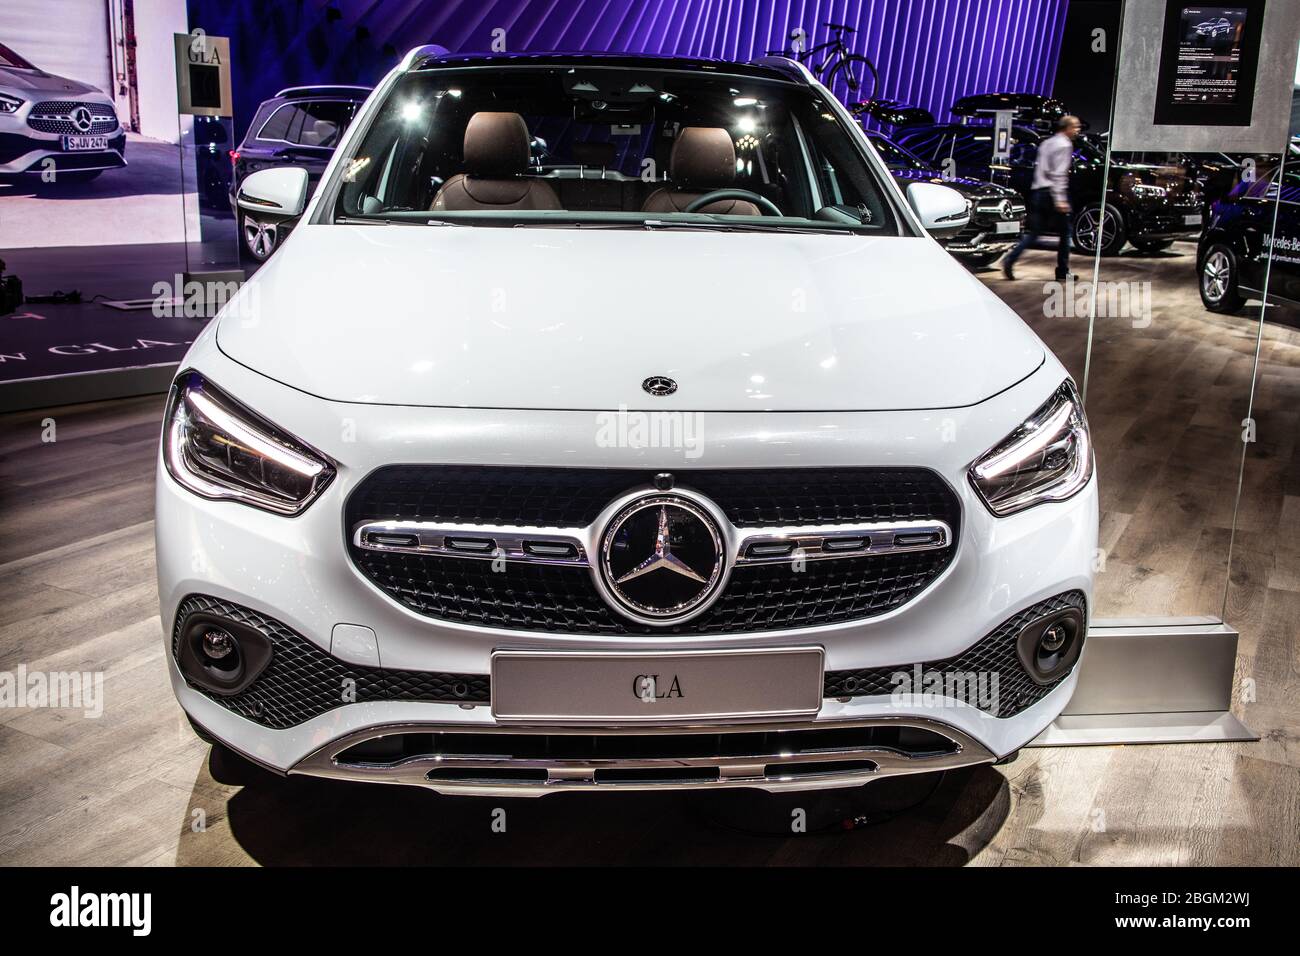 Brussels Belgium Jan 2020 Mercedes Gla 200 Brussels Motor Show Second Generation H247 Suv Produced By Mercedes Benz Stock Photo Alamy